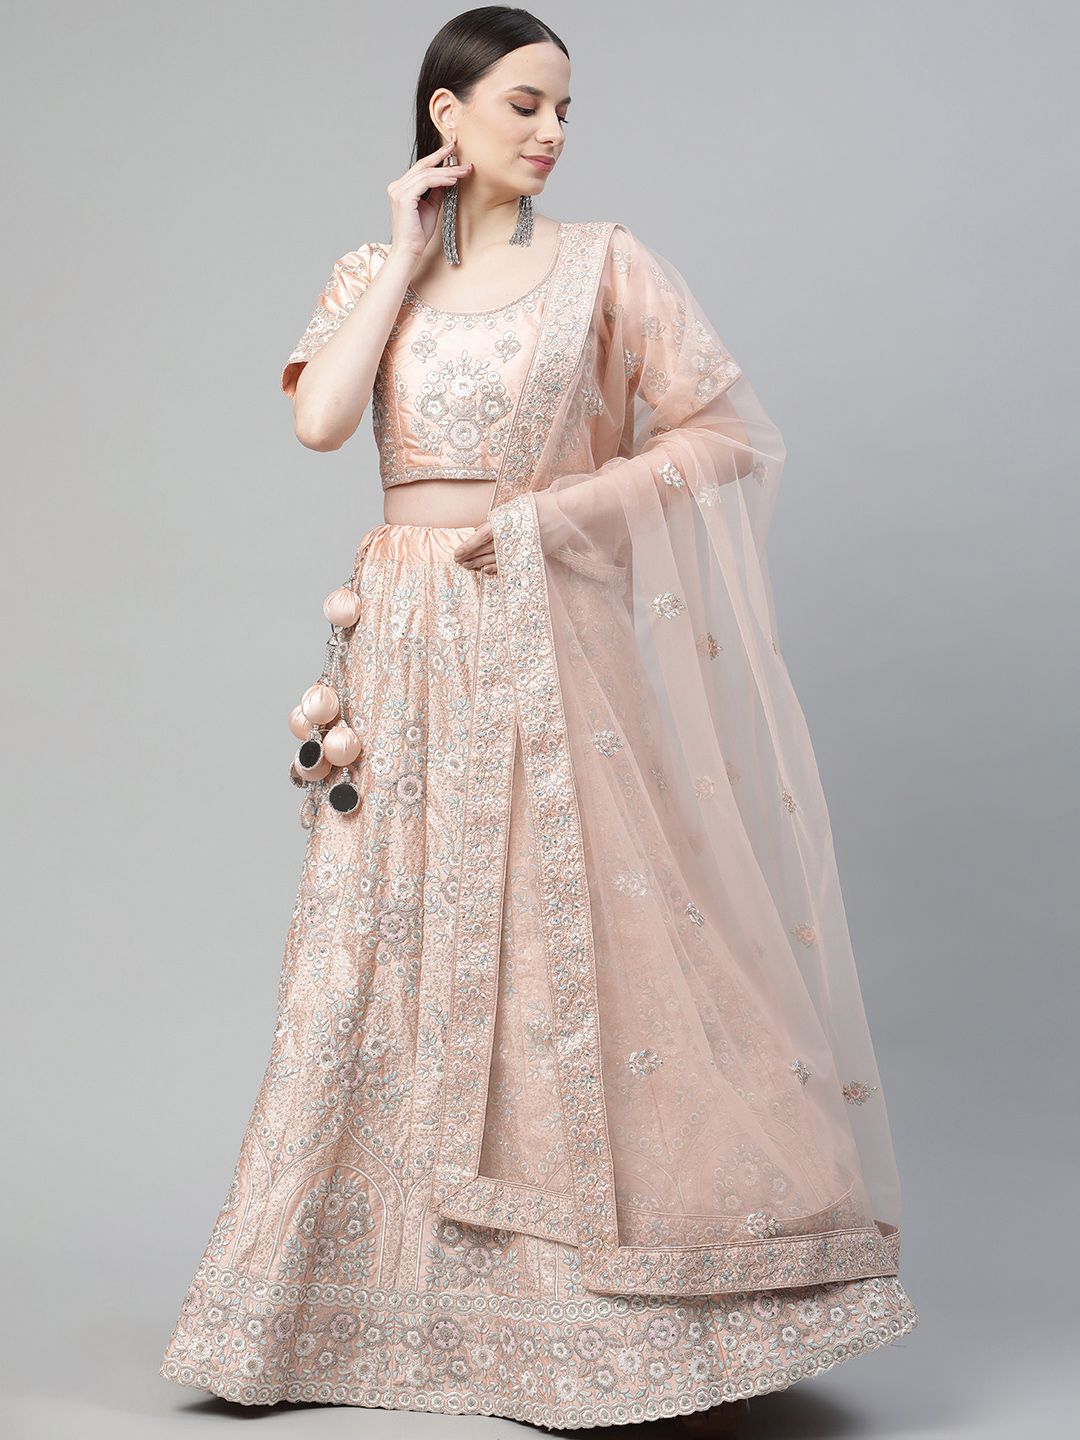 Readiprint Fashions Peach-Coloured Embroidered Sequinned Semi-Stitched Lehenga & Unstitched Blouse With Price in India